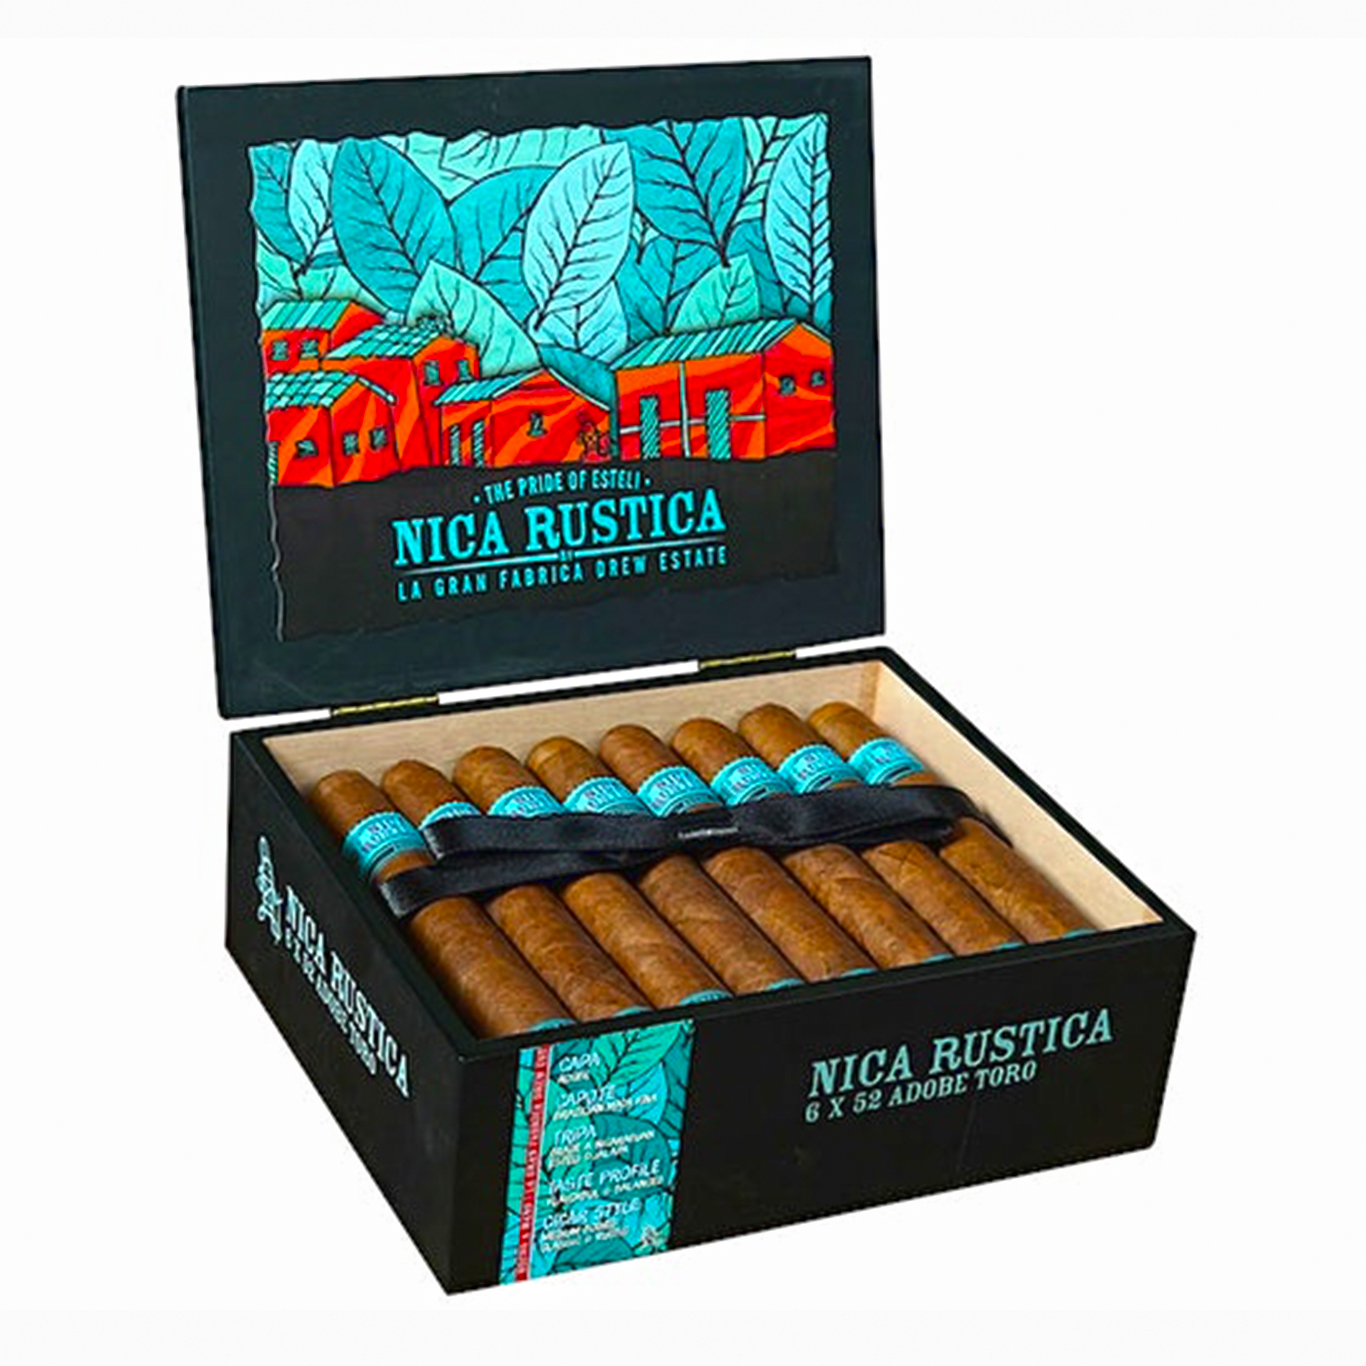 A picture of a Nica Rustica Adobe cigar with sweet spice and black pepper flavors